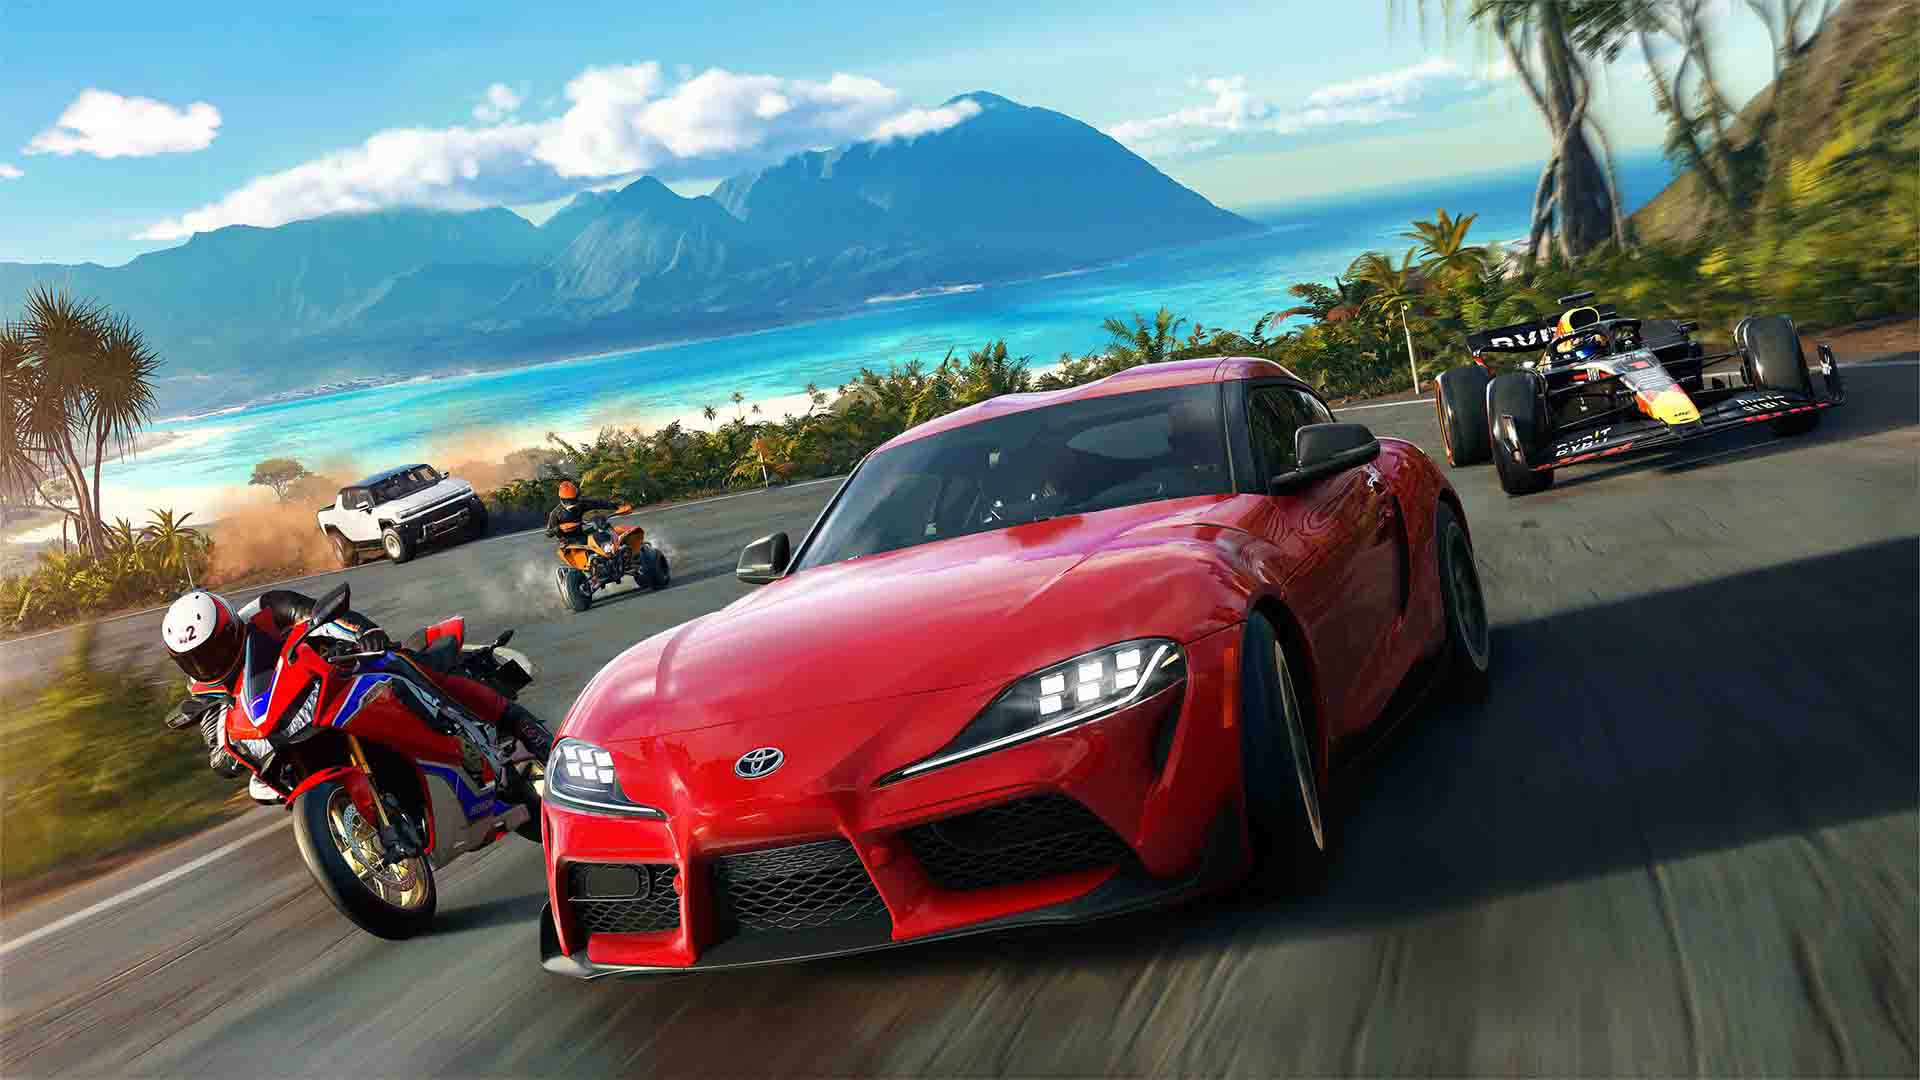 The Crew Motorfest Lets You Keep Your Crew 2 Vehicles - Insider Gaming